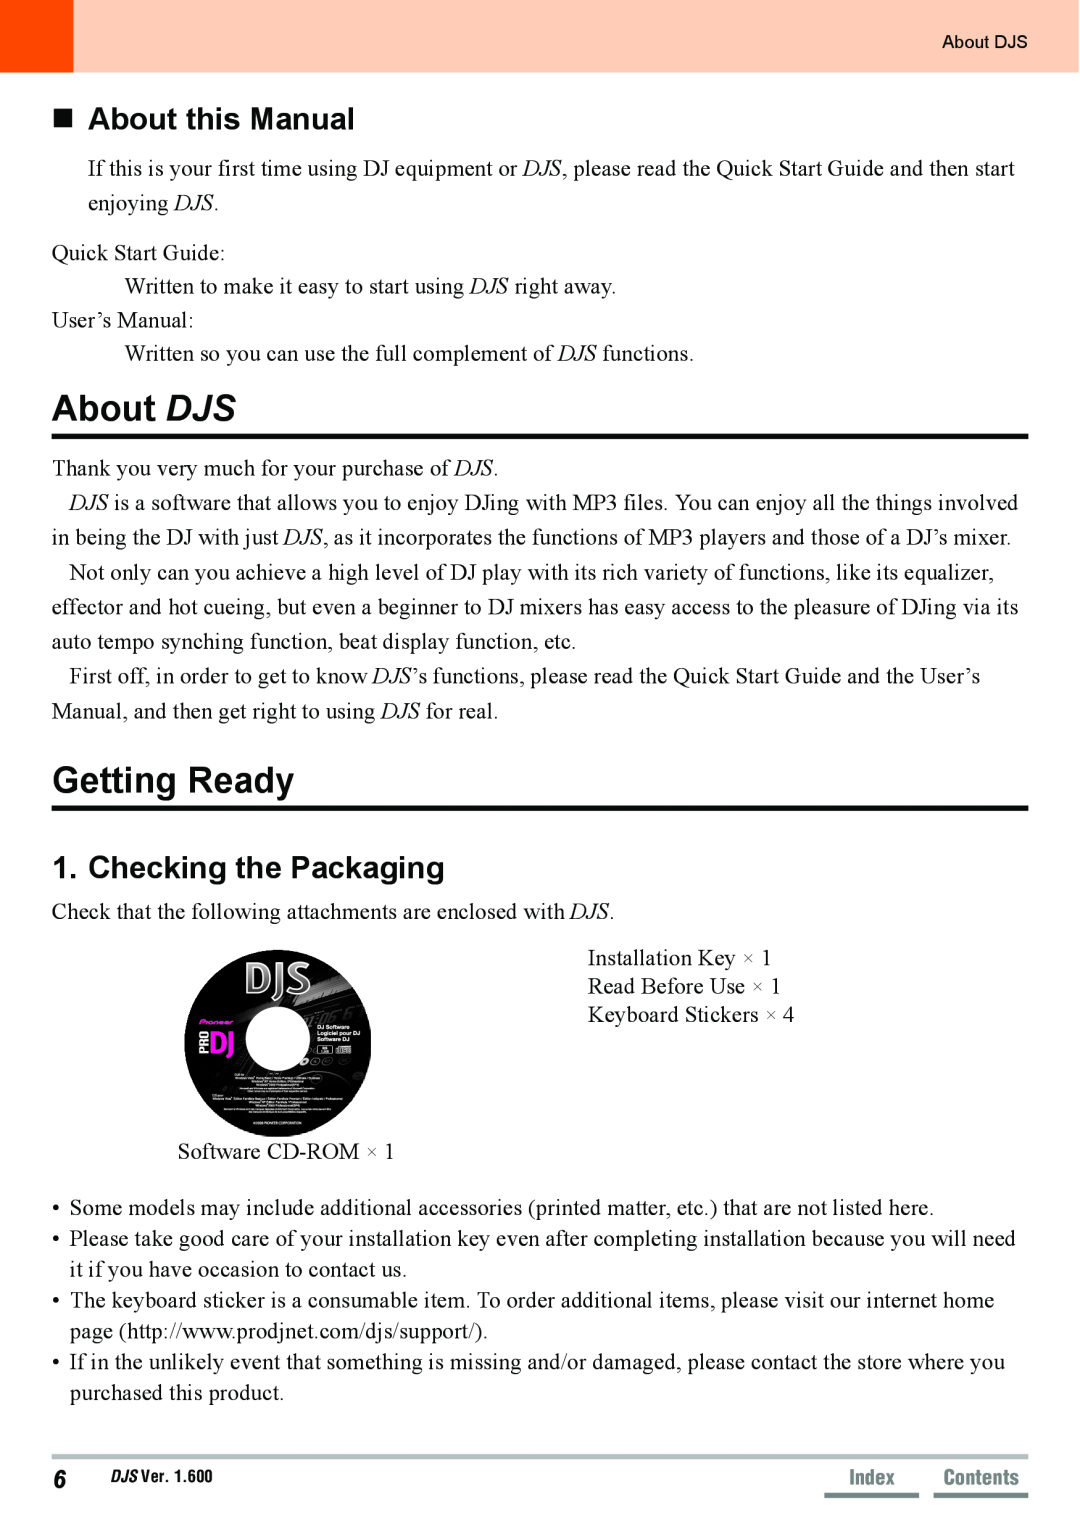 Pioneer SVJ-DL01D, SVJ-DS01D manual About DJS, Getting Ready, About this Manual, Checking the Packaging 